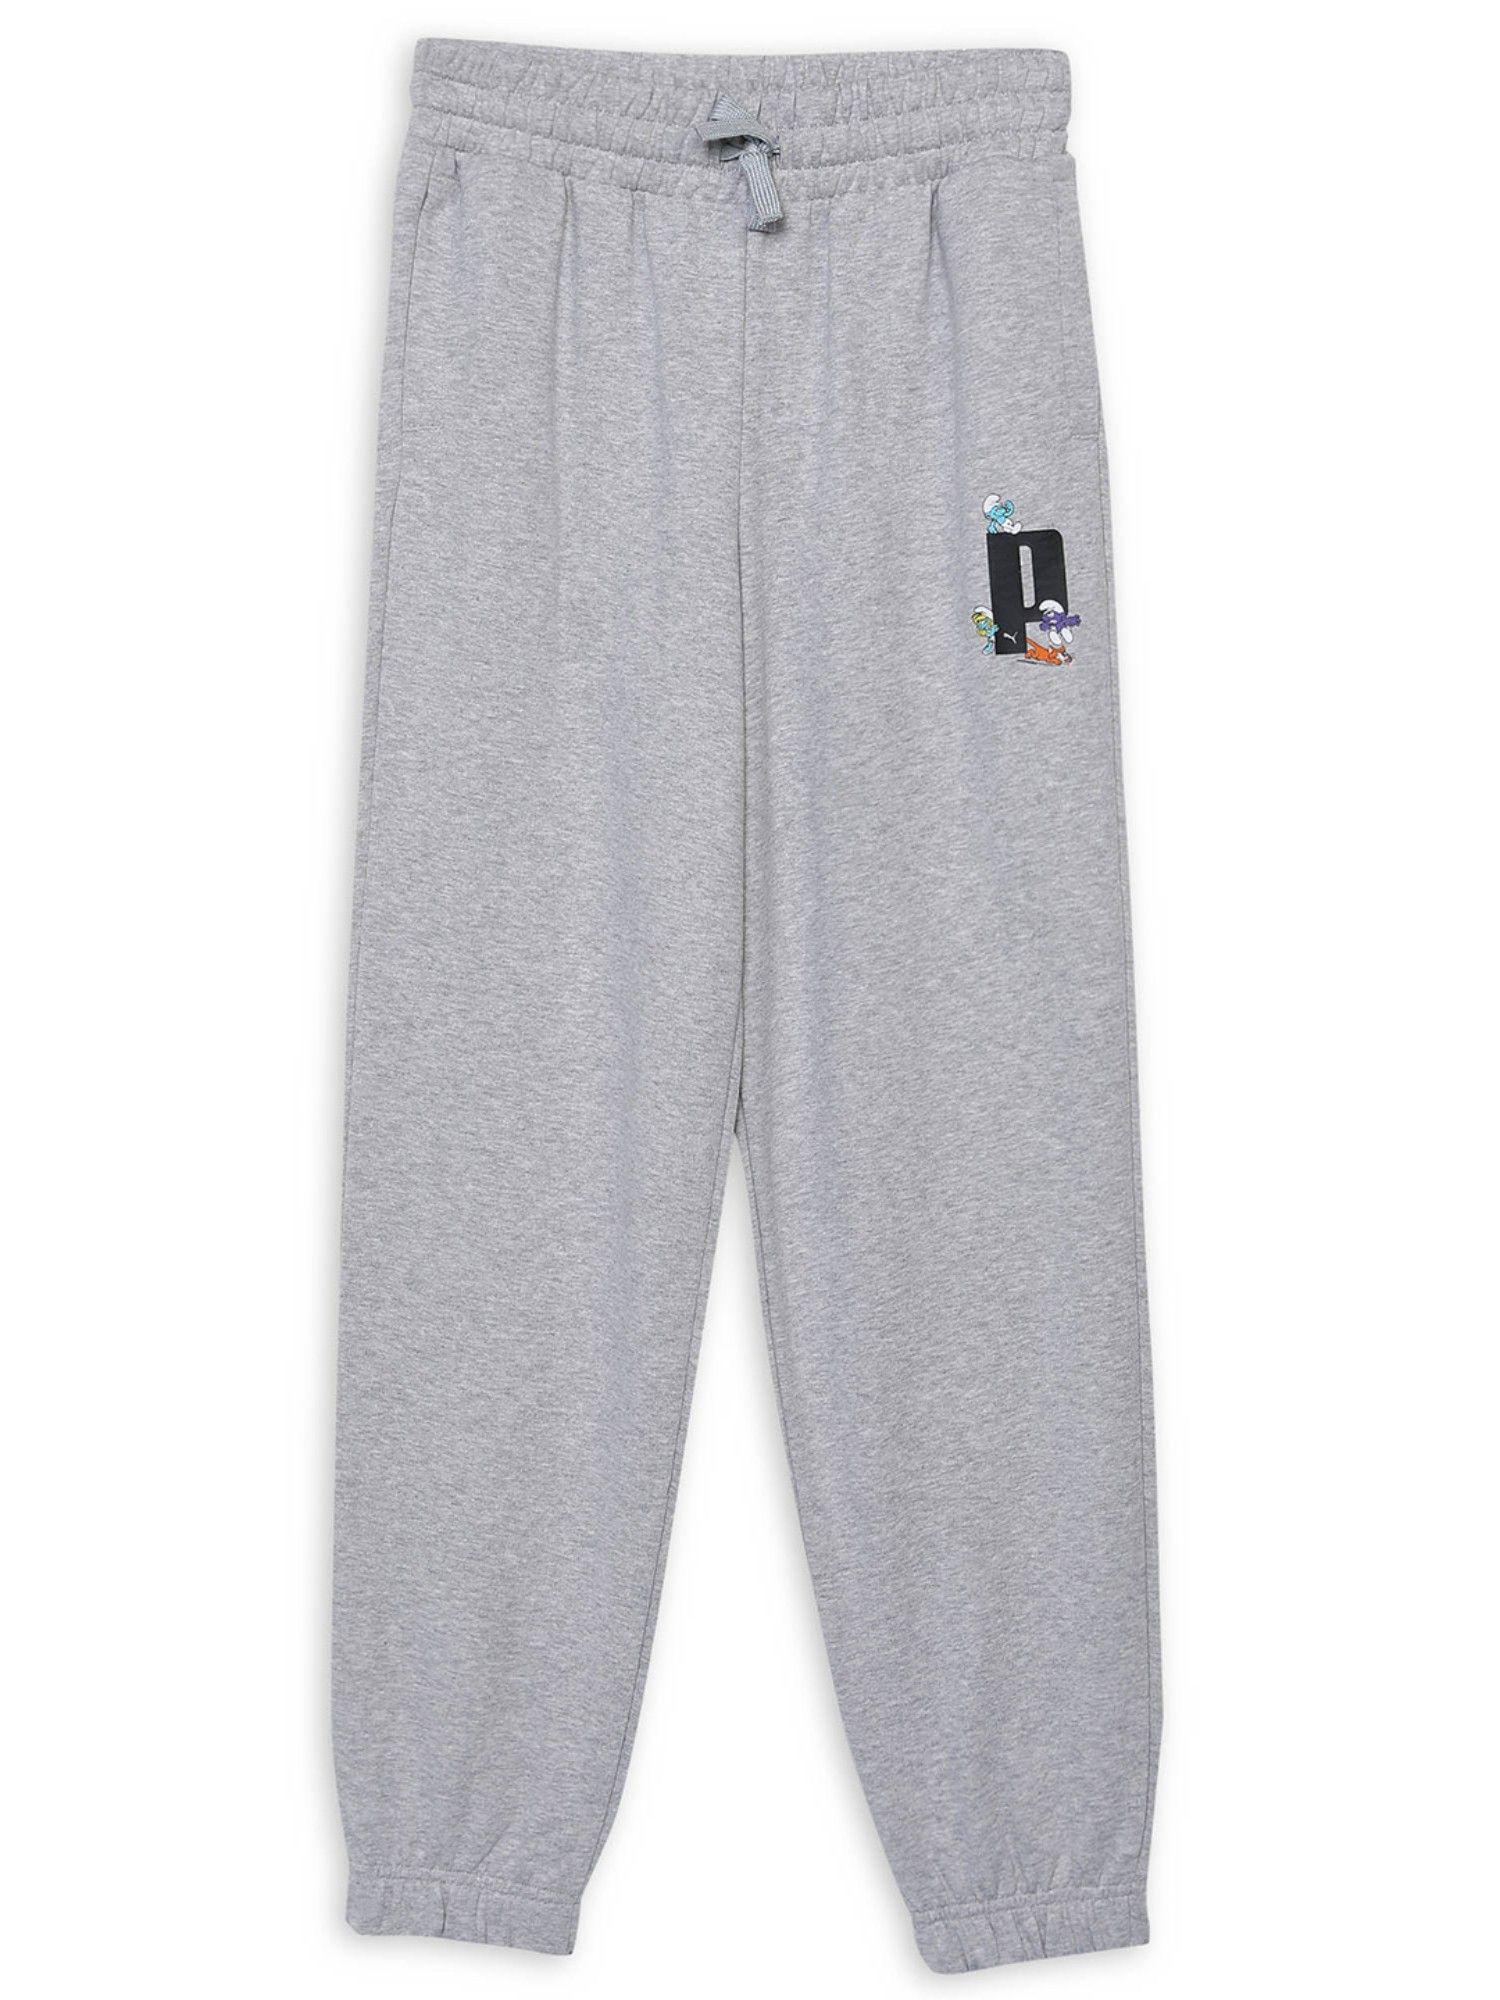 x the smurfs boys grey knitted joggers